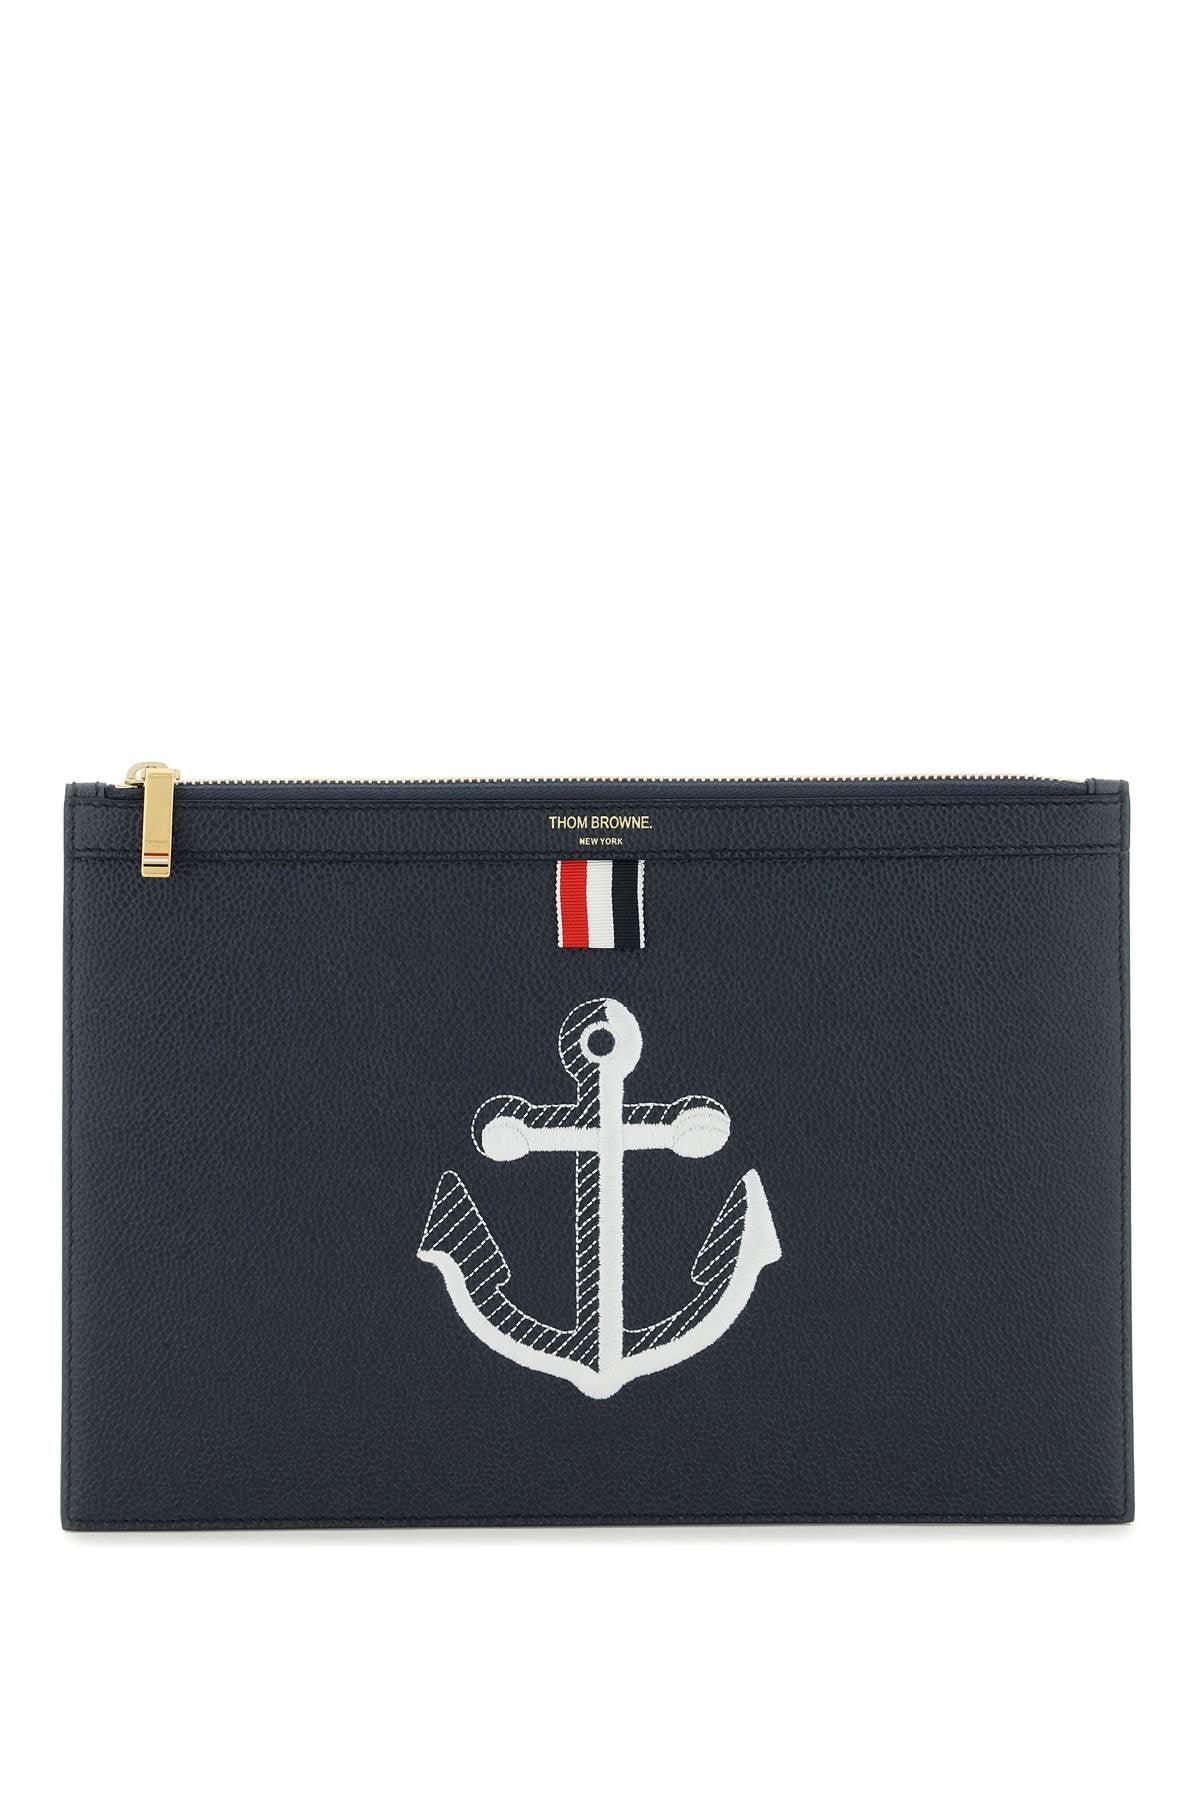 Thom Browne Grained Leather Pouch - JOHN JULIA